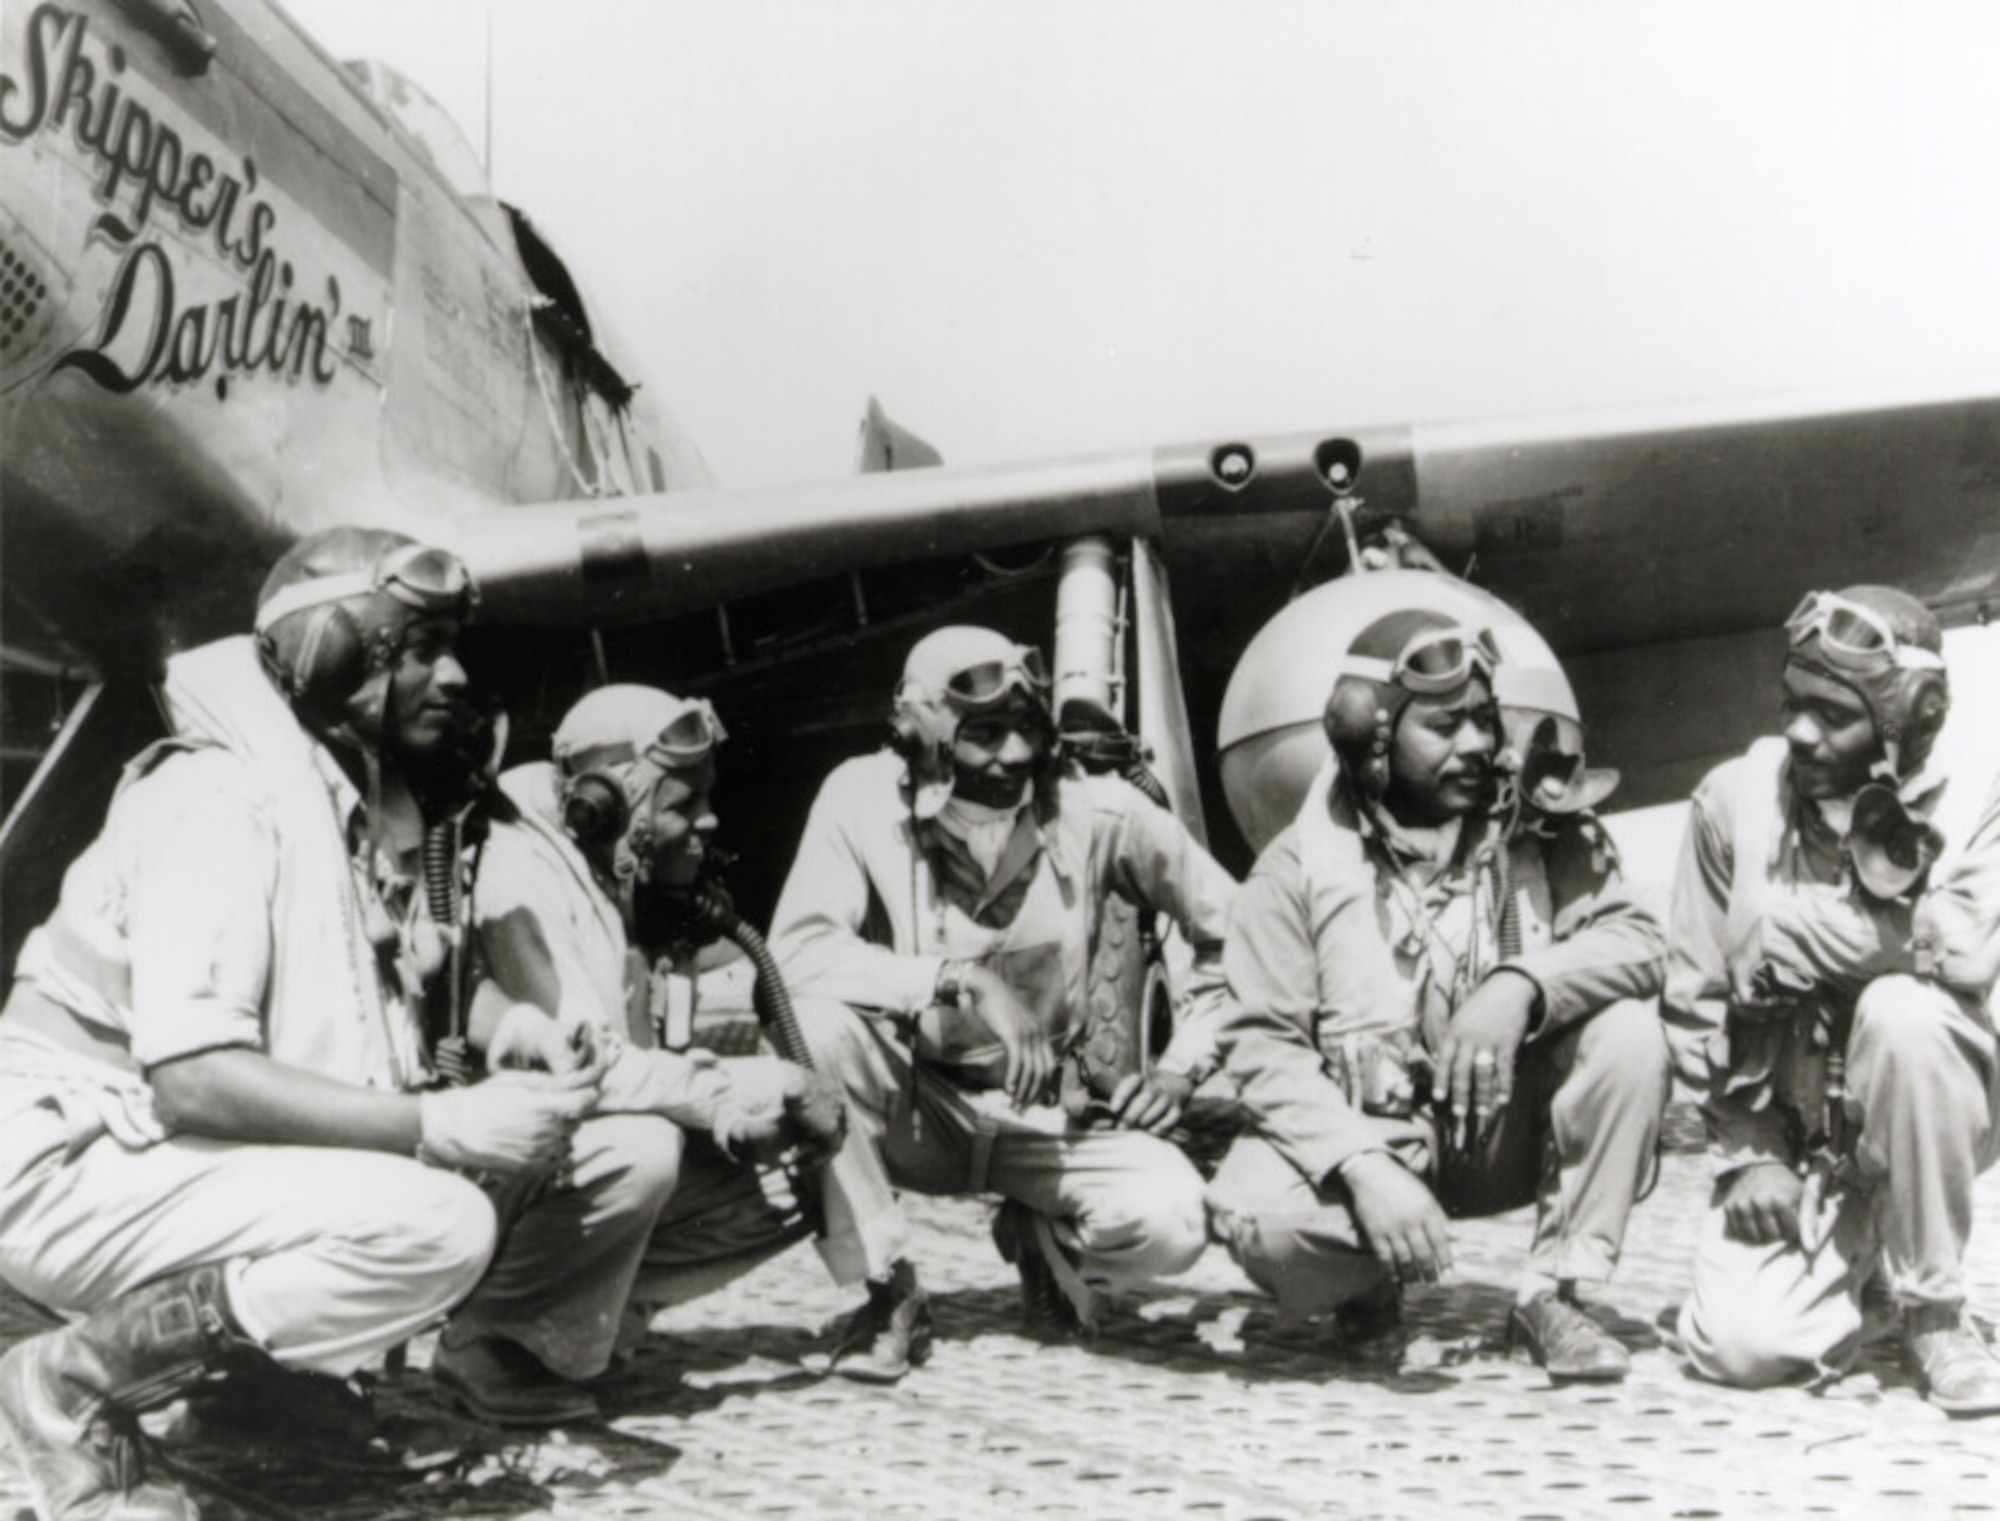 Tuskegee Airmen in WWII